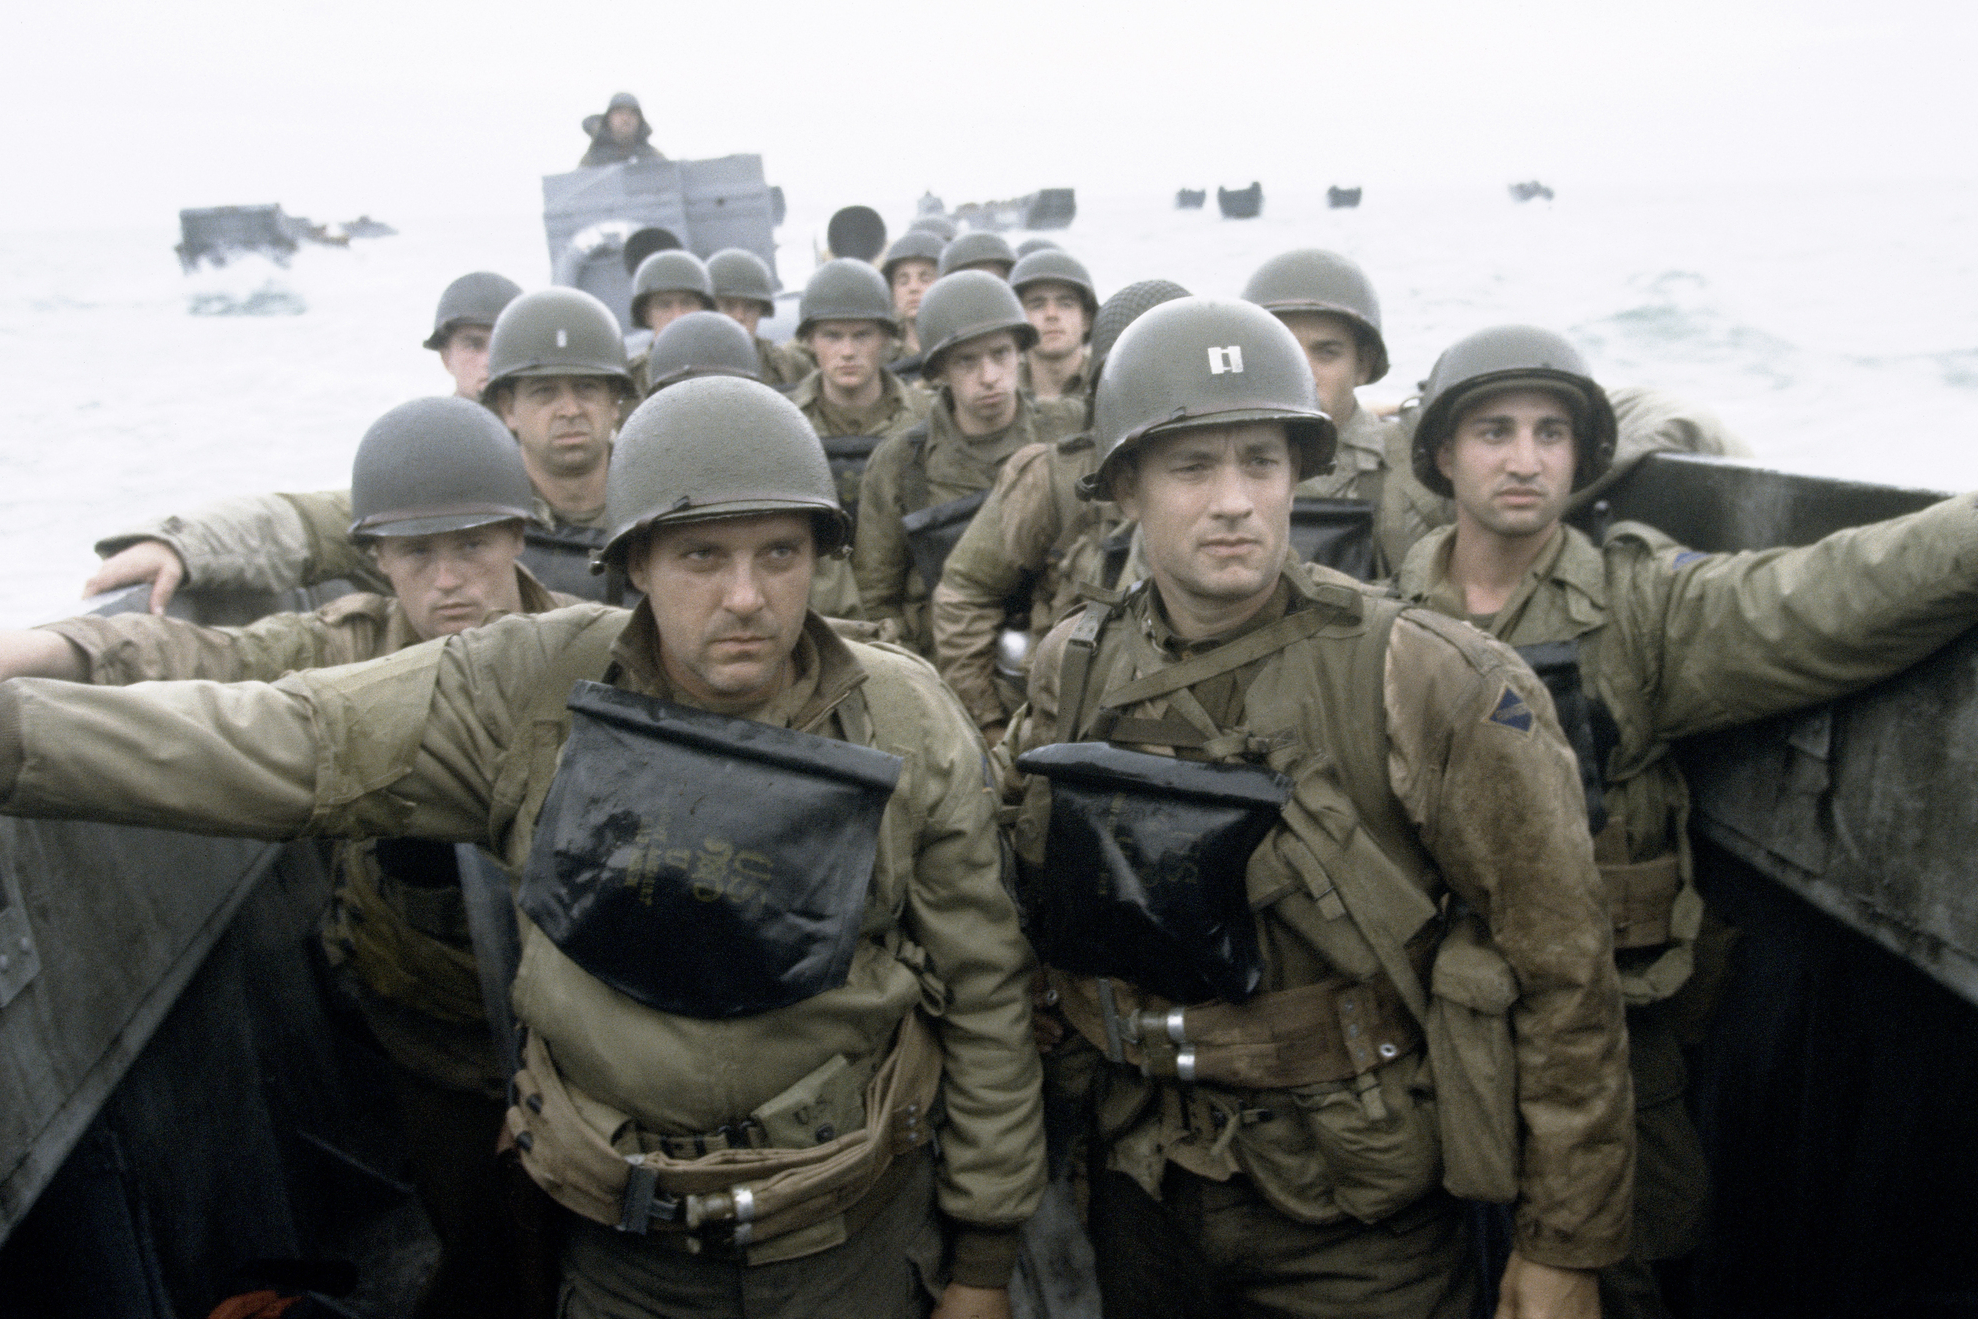 Tom Hanks, Tom Sizemore, and other actors playing as American soldiers riding a boat in "Saving Private Ryan."